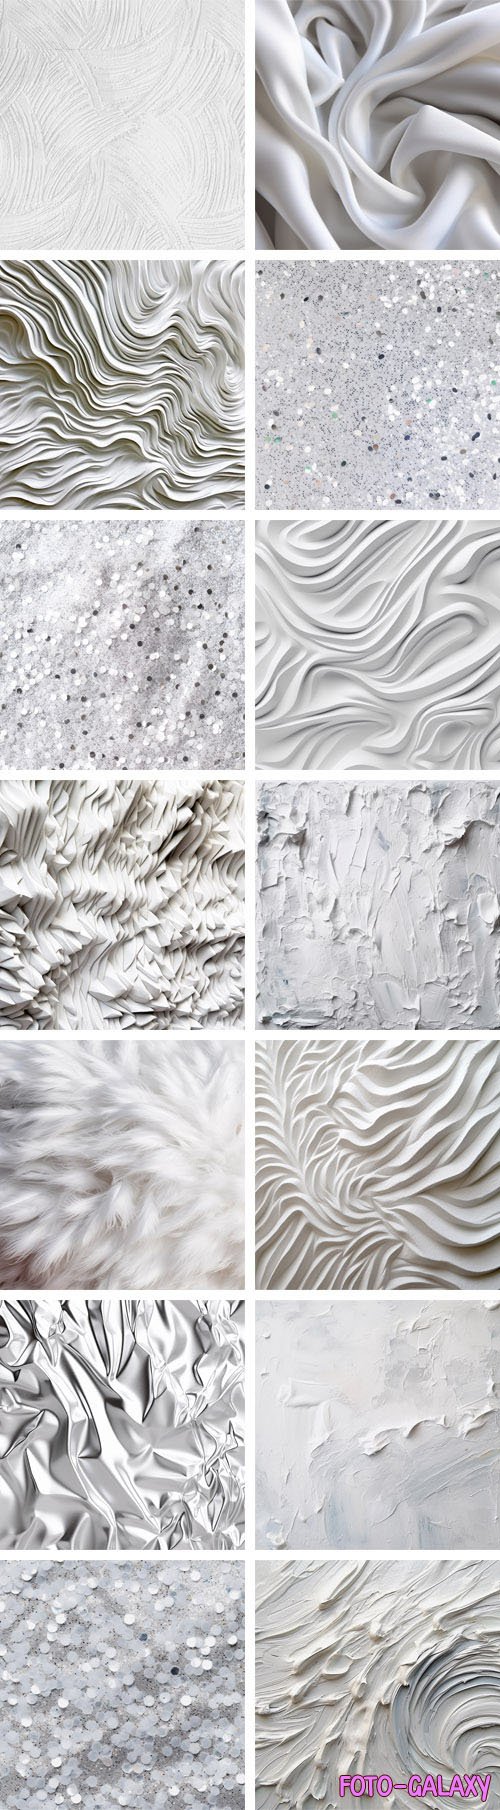 Bright White Textures Collection